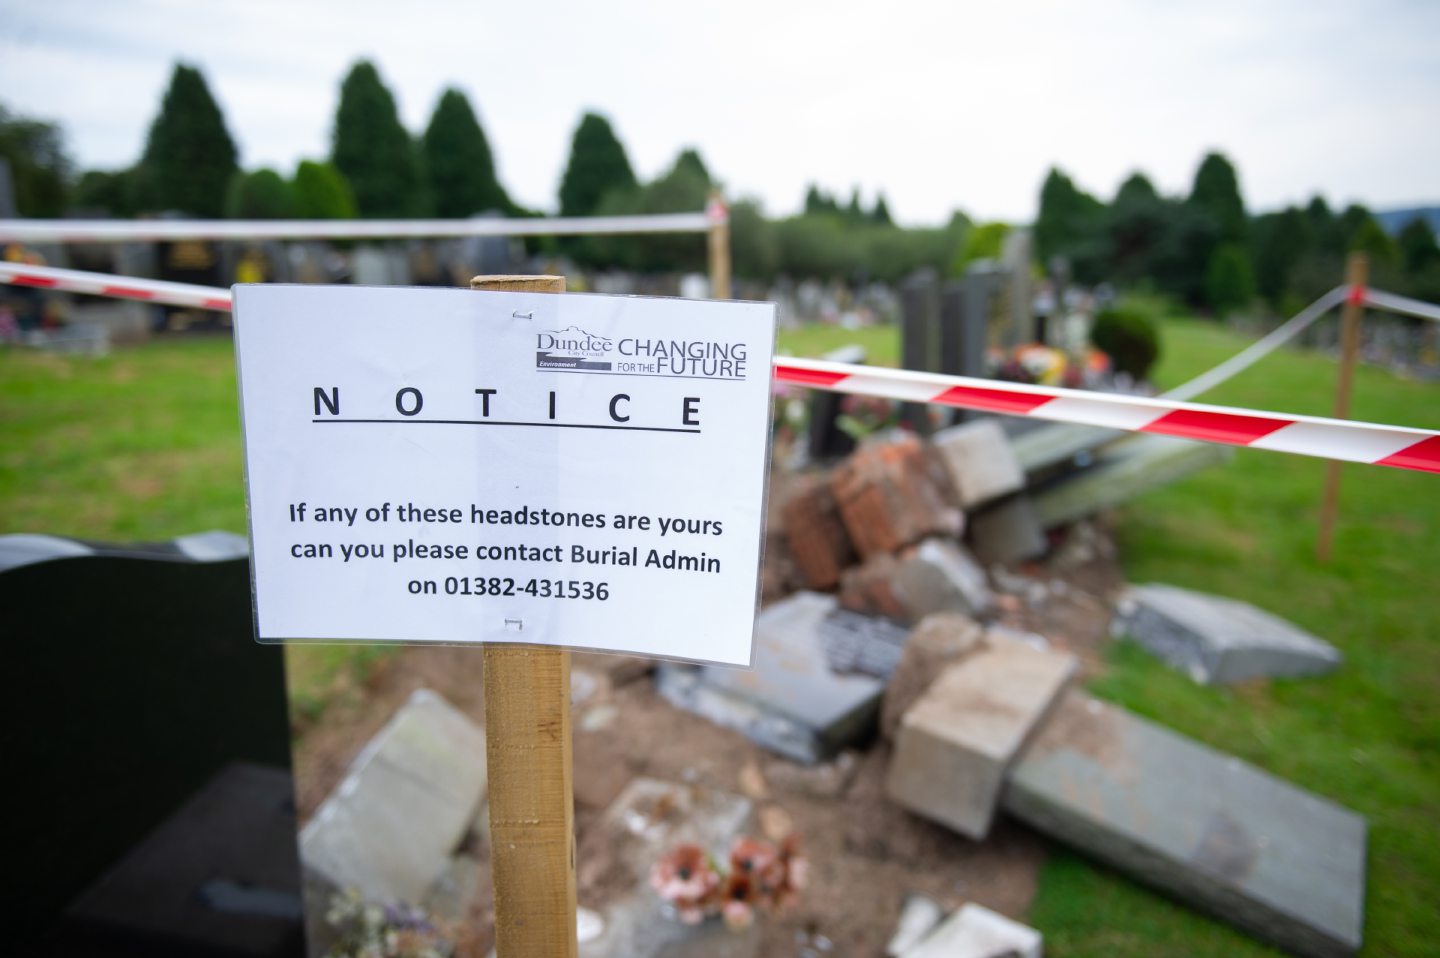 The council advisory notice left at the damaged headstones at Balgay Cemetery in August.